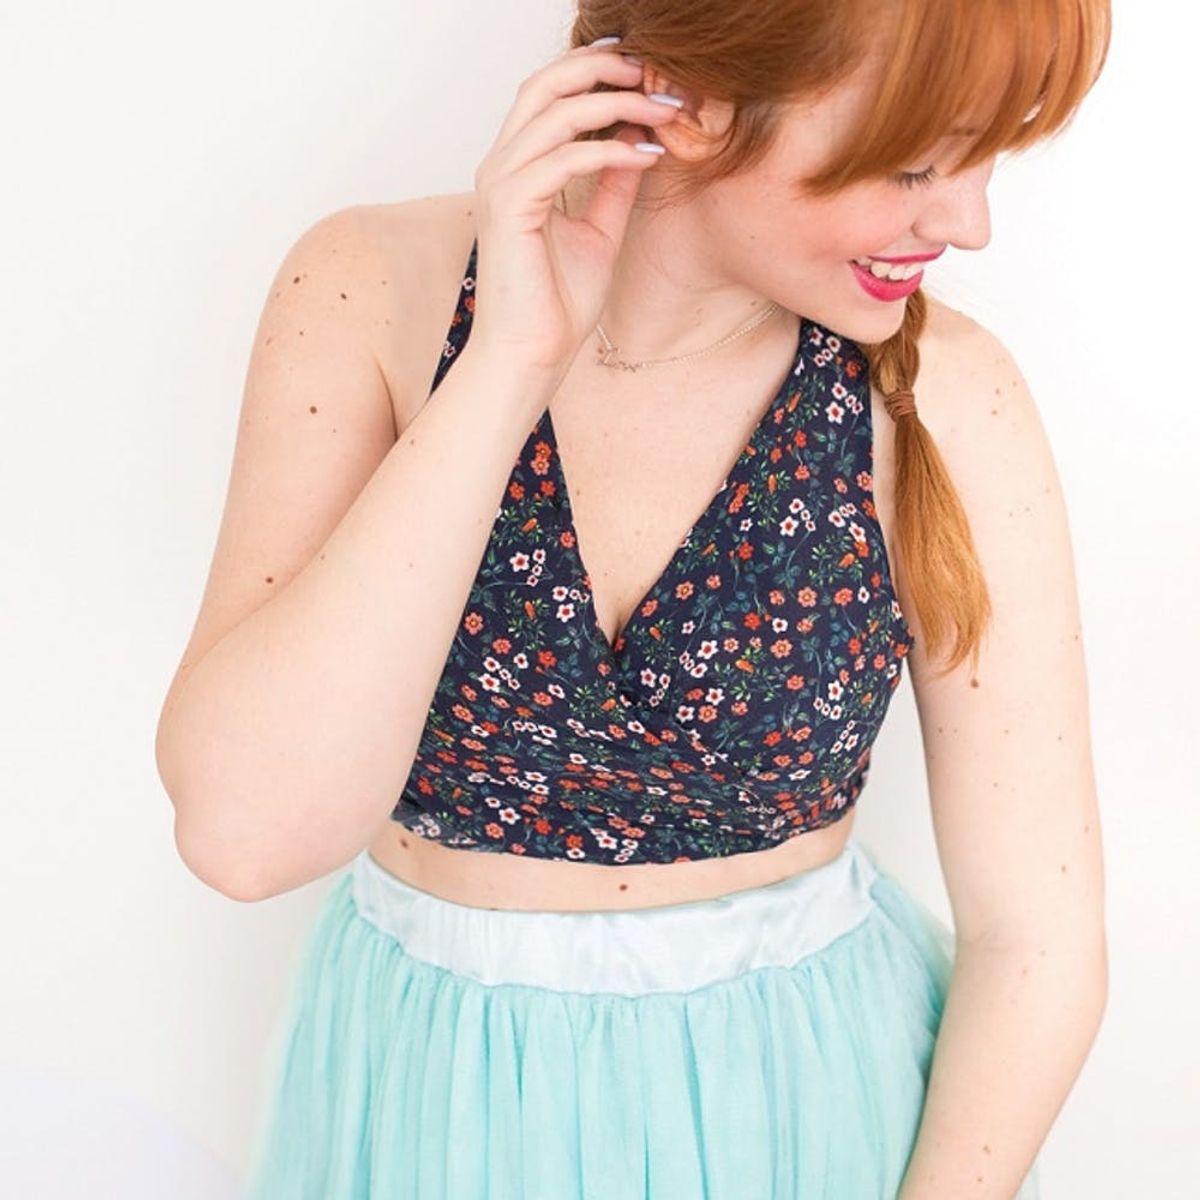 How to Make a No-Sew Crop Top in Less Than 15 Minutes